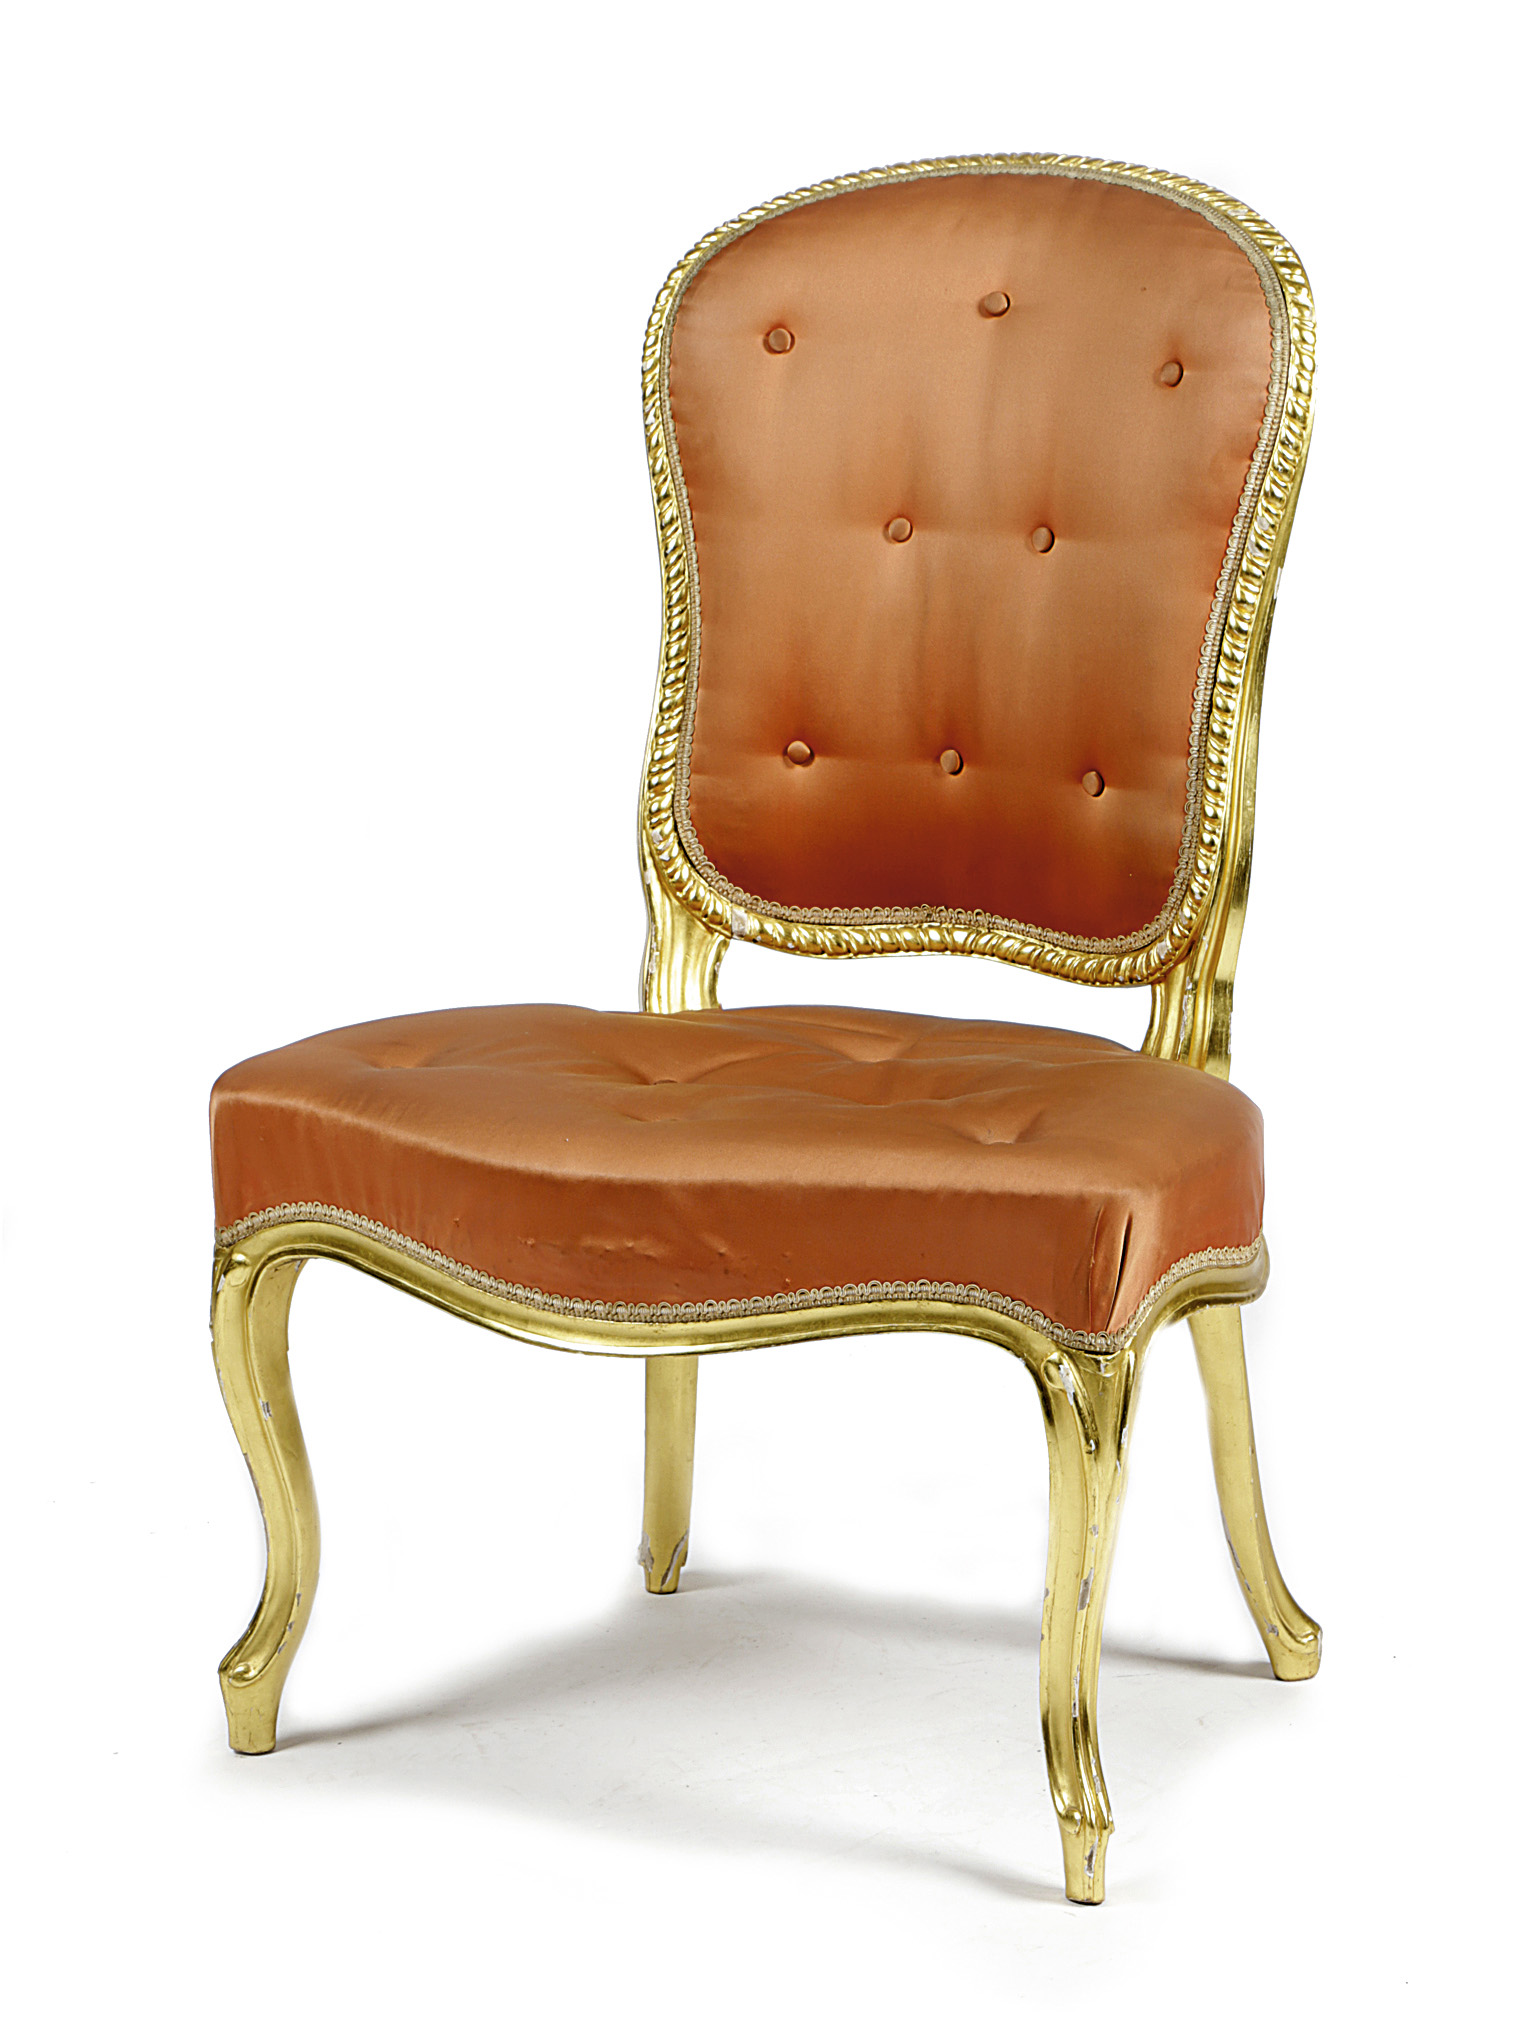 A GEORGE III GILTWOOD SIDE CHAIR IN THE FRENCH MANNER, LATE 18TH CENTURY the padded back and seat